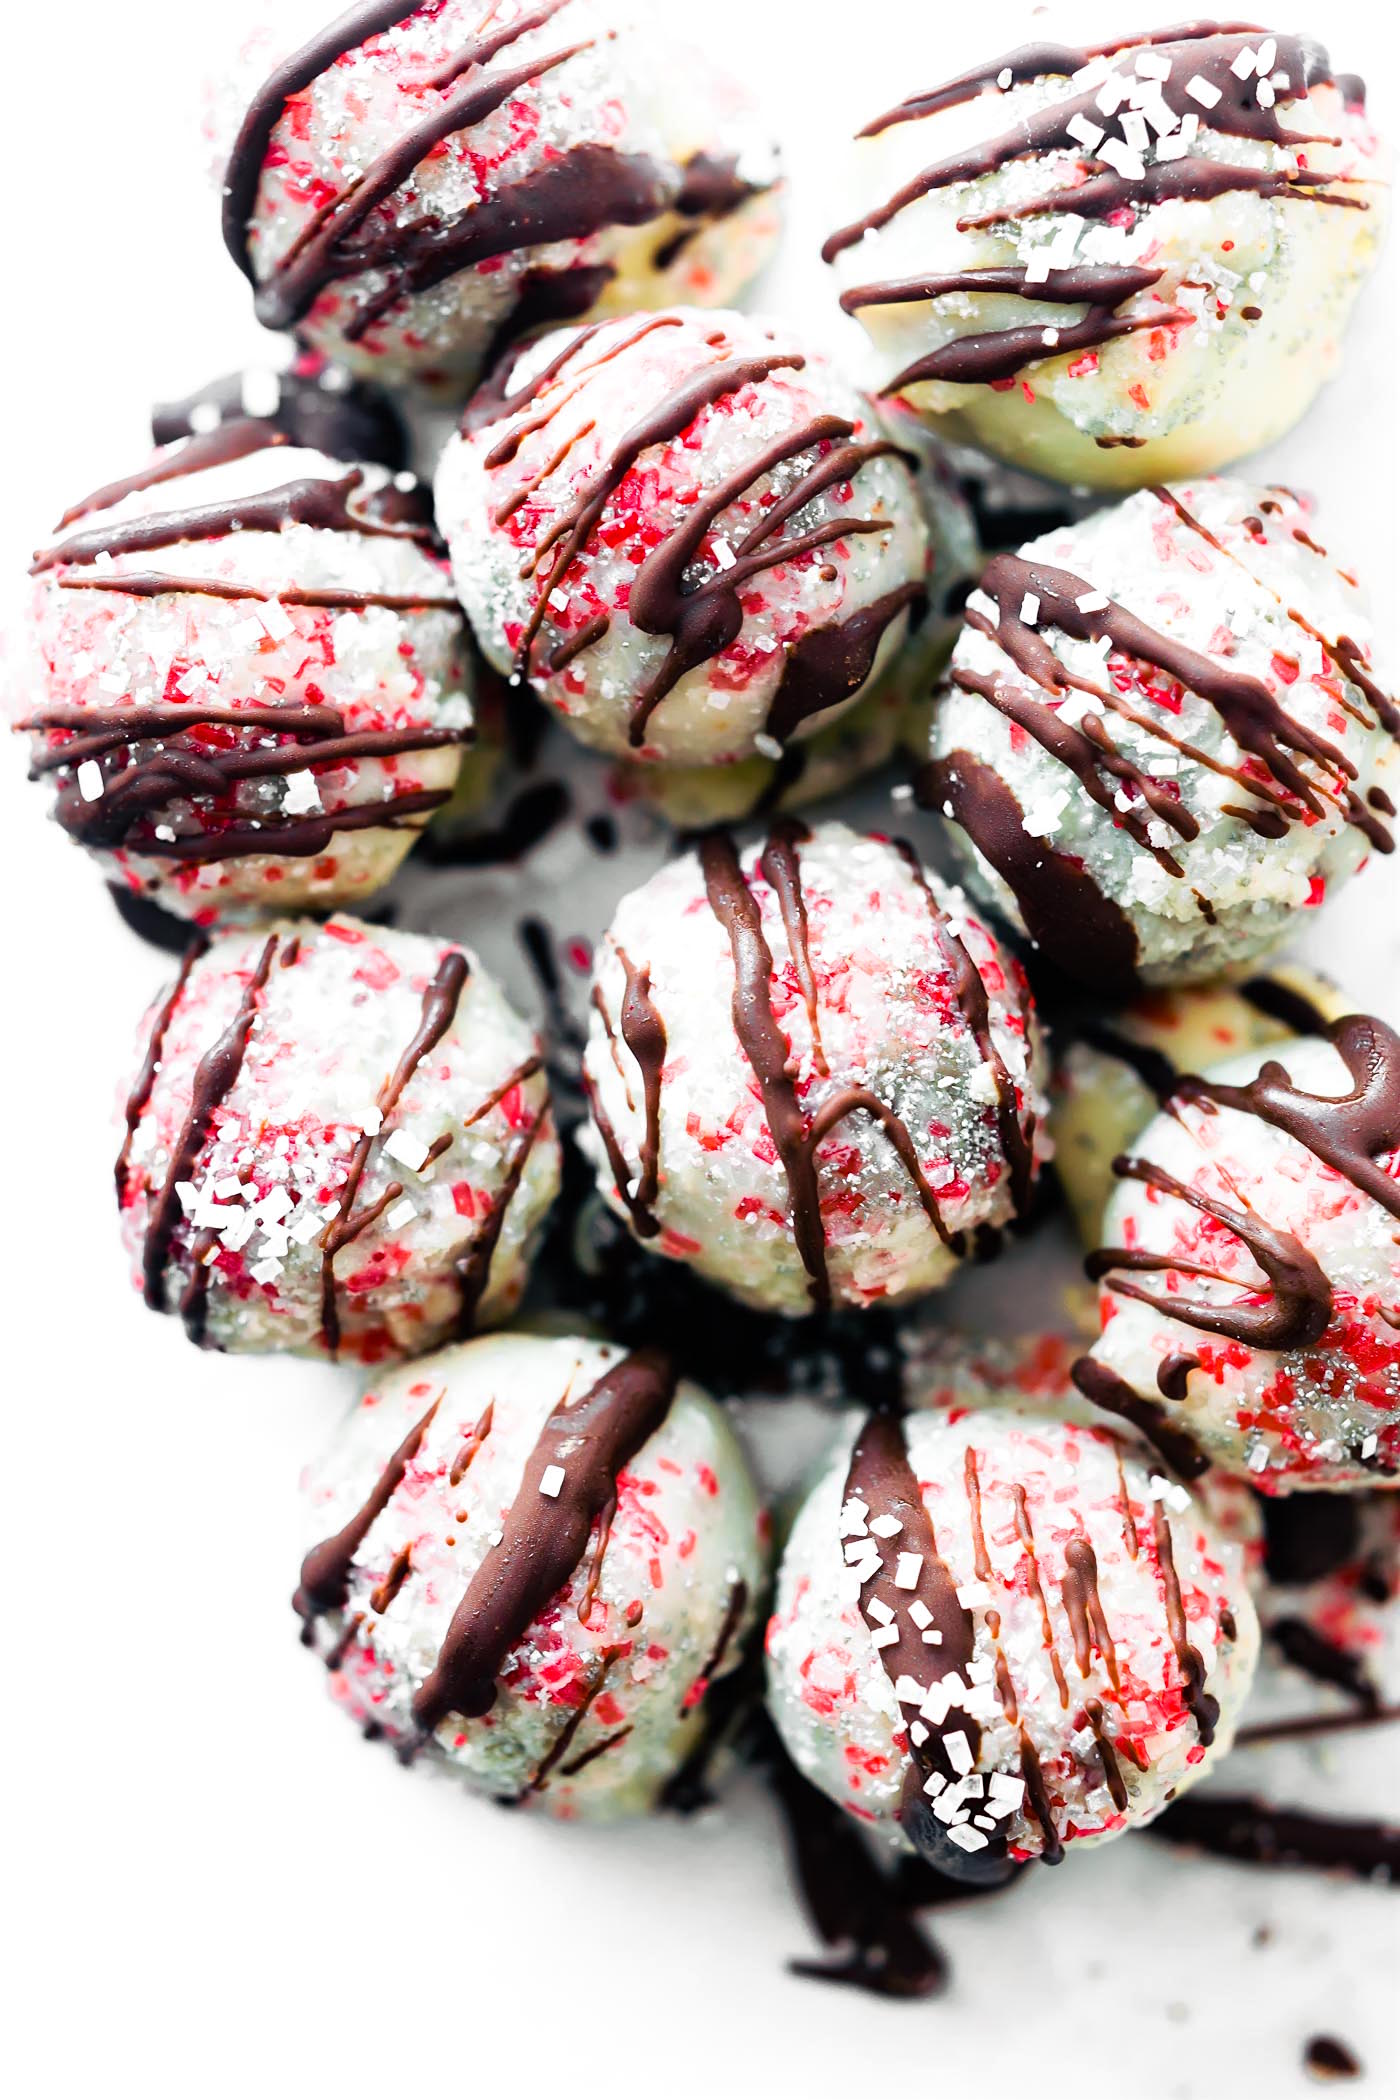 Several white chocolate coated peppermint rum balls with drizzled dark chocolate and red sprinkles.